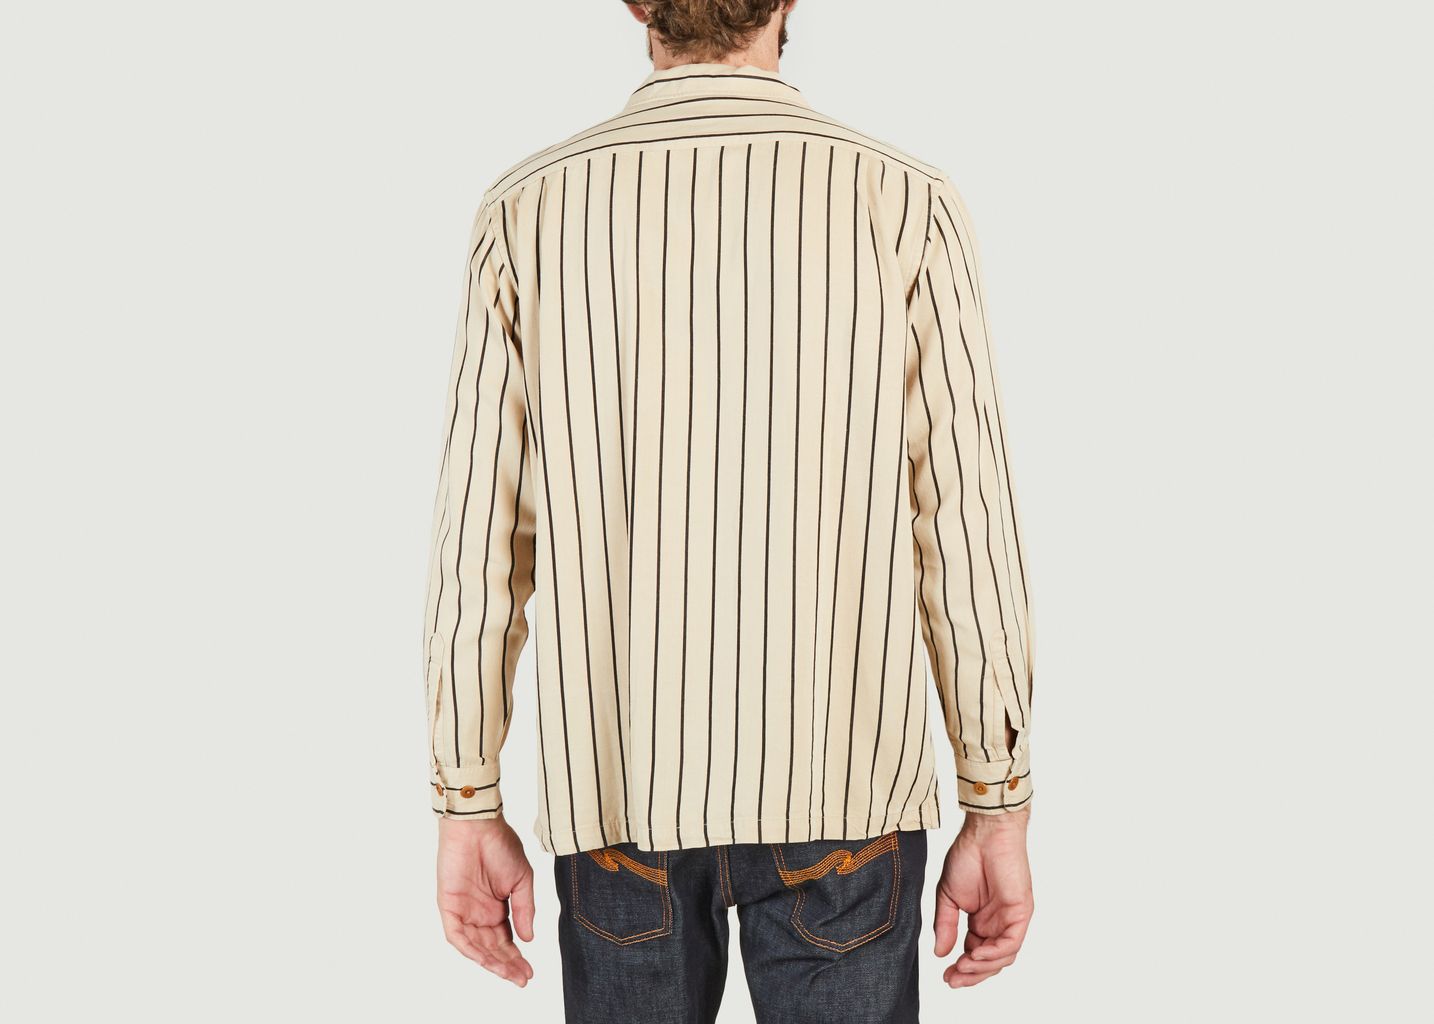  Vincent striped shirt  - Nudie Jeans